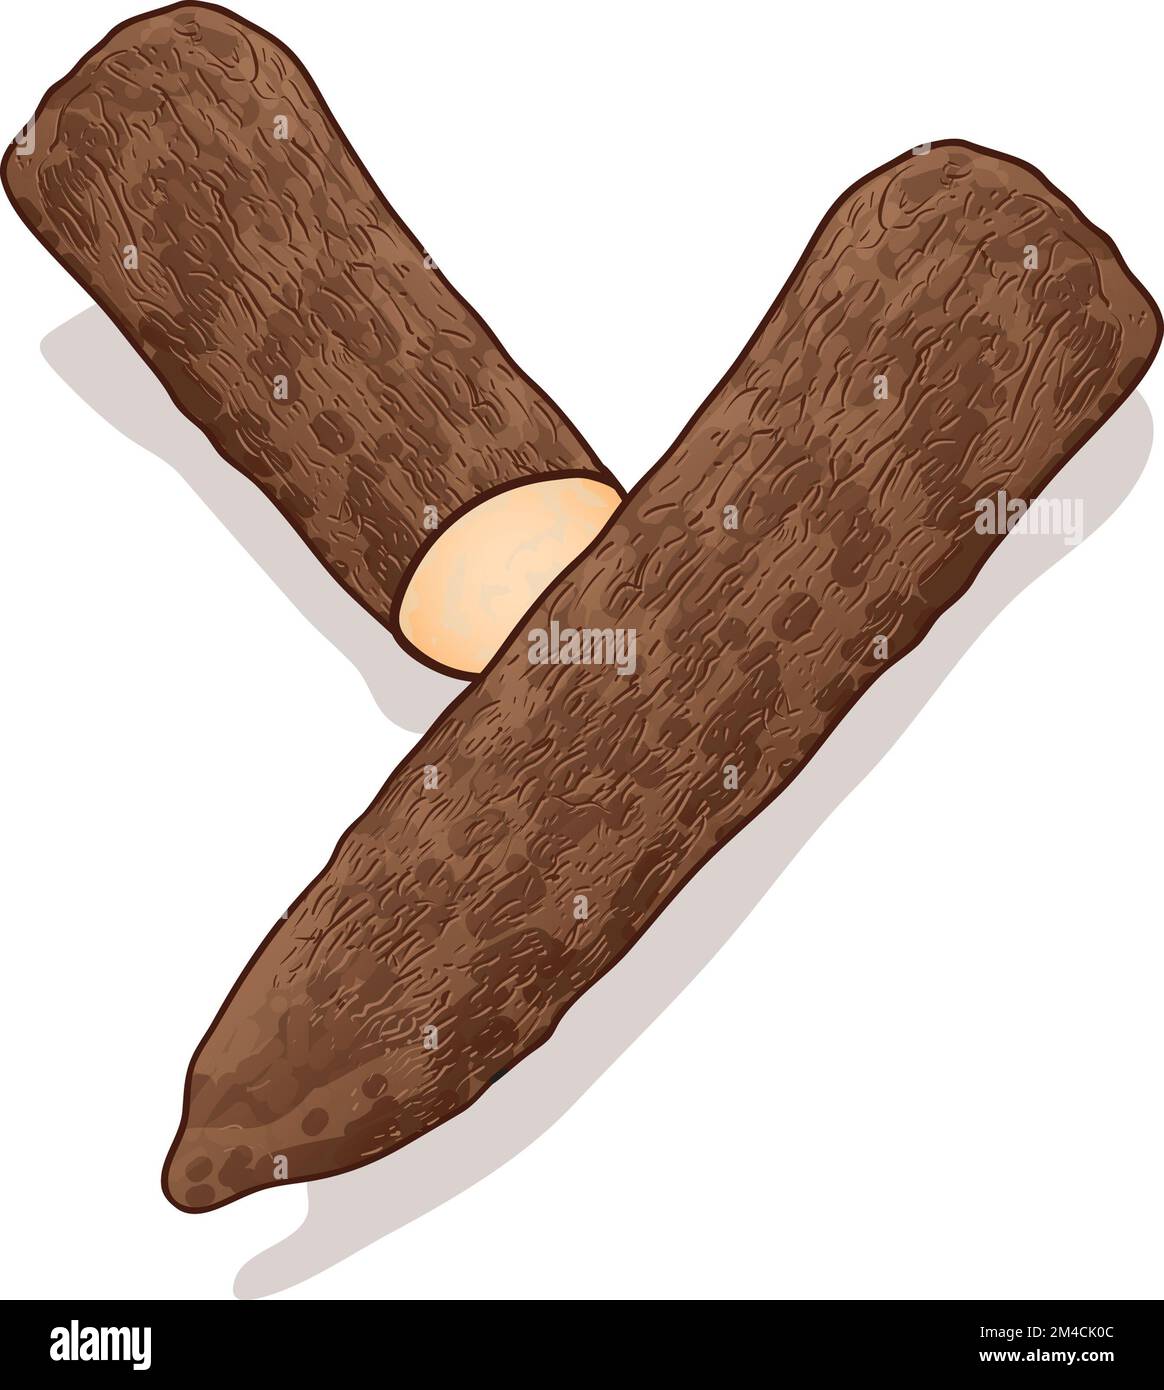 Art illustration two yams, one cut open, one whole Yam is the common name for species in the genus Dioscorea that form edible tubers and grow on vines Stock Photo